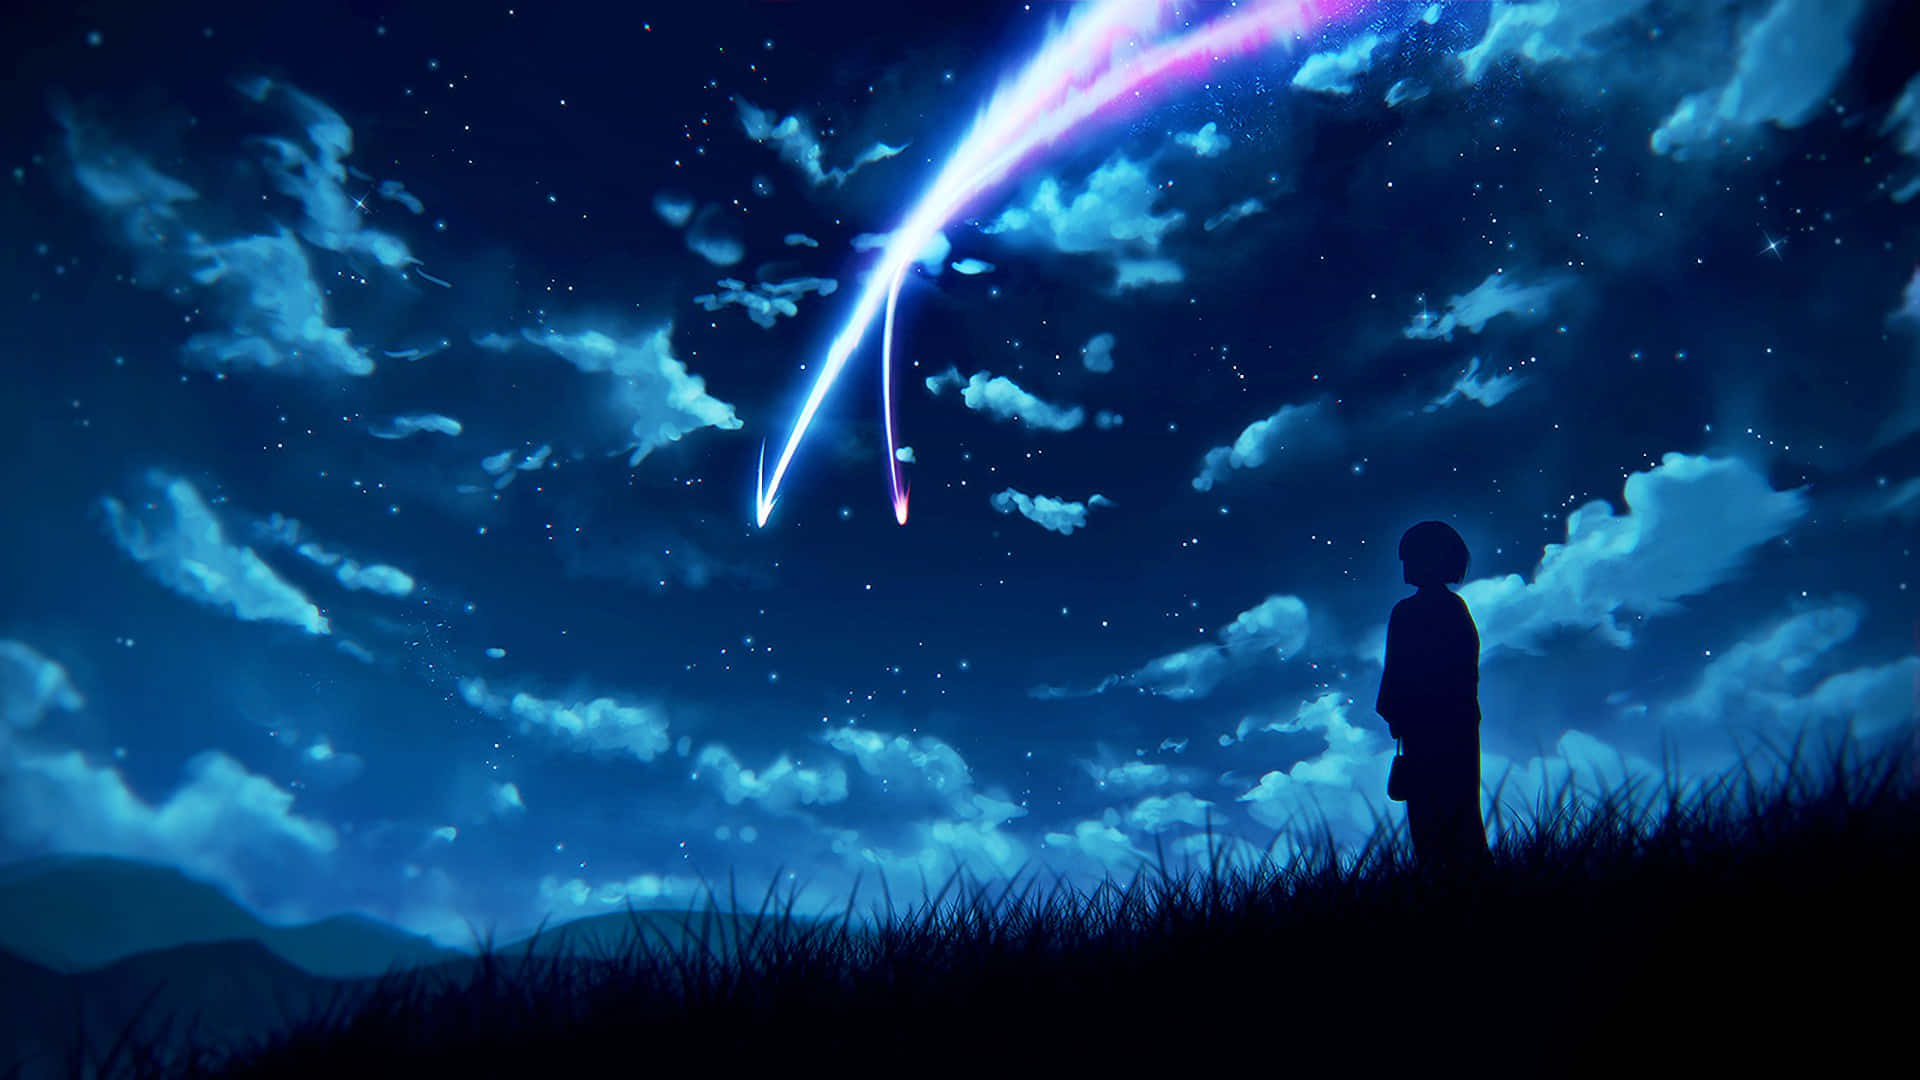 Free Anime Sky Background , [100+] Anime Sky Background s for FREE |  